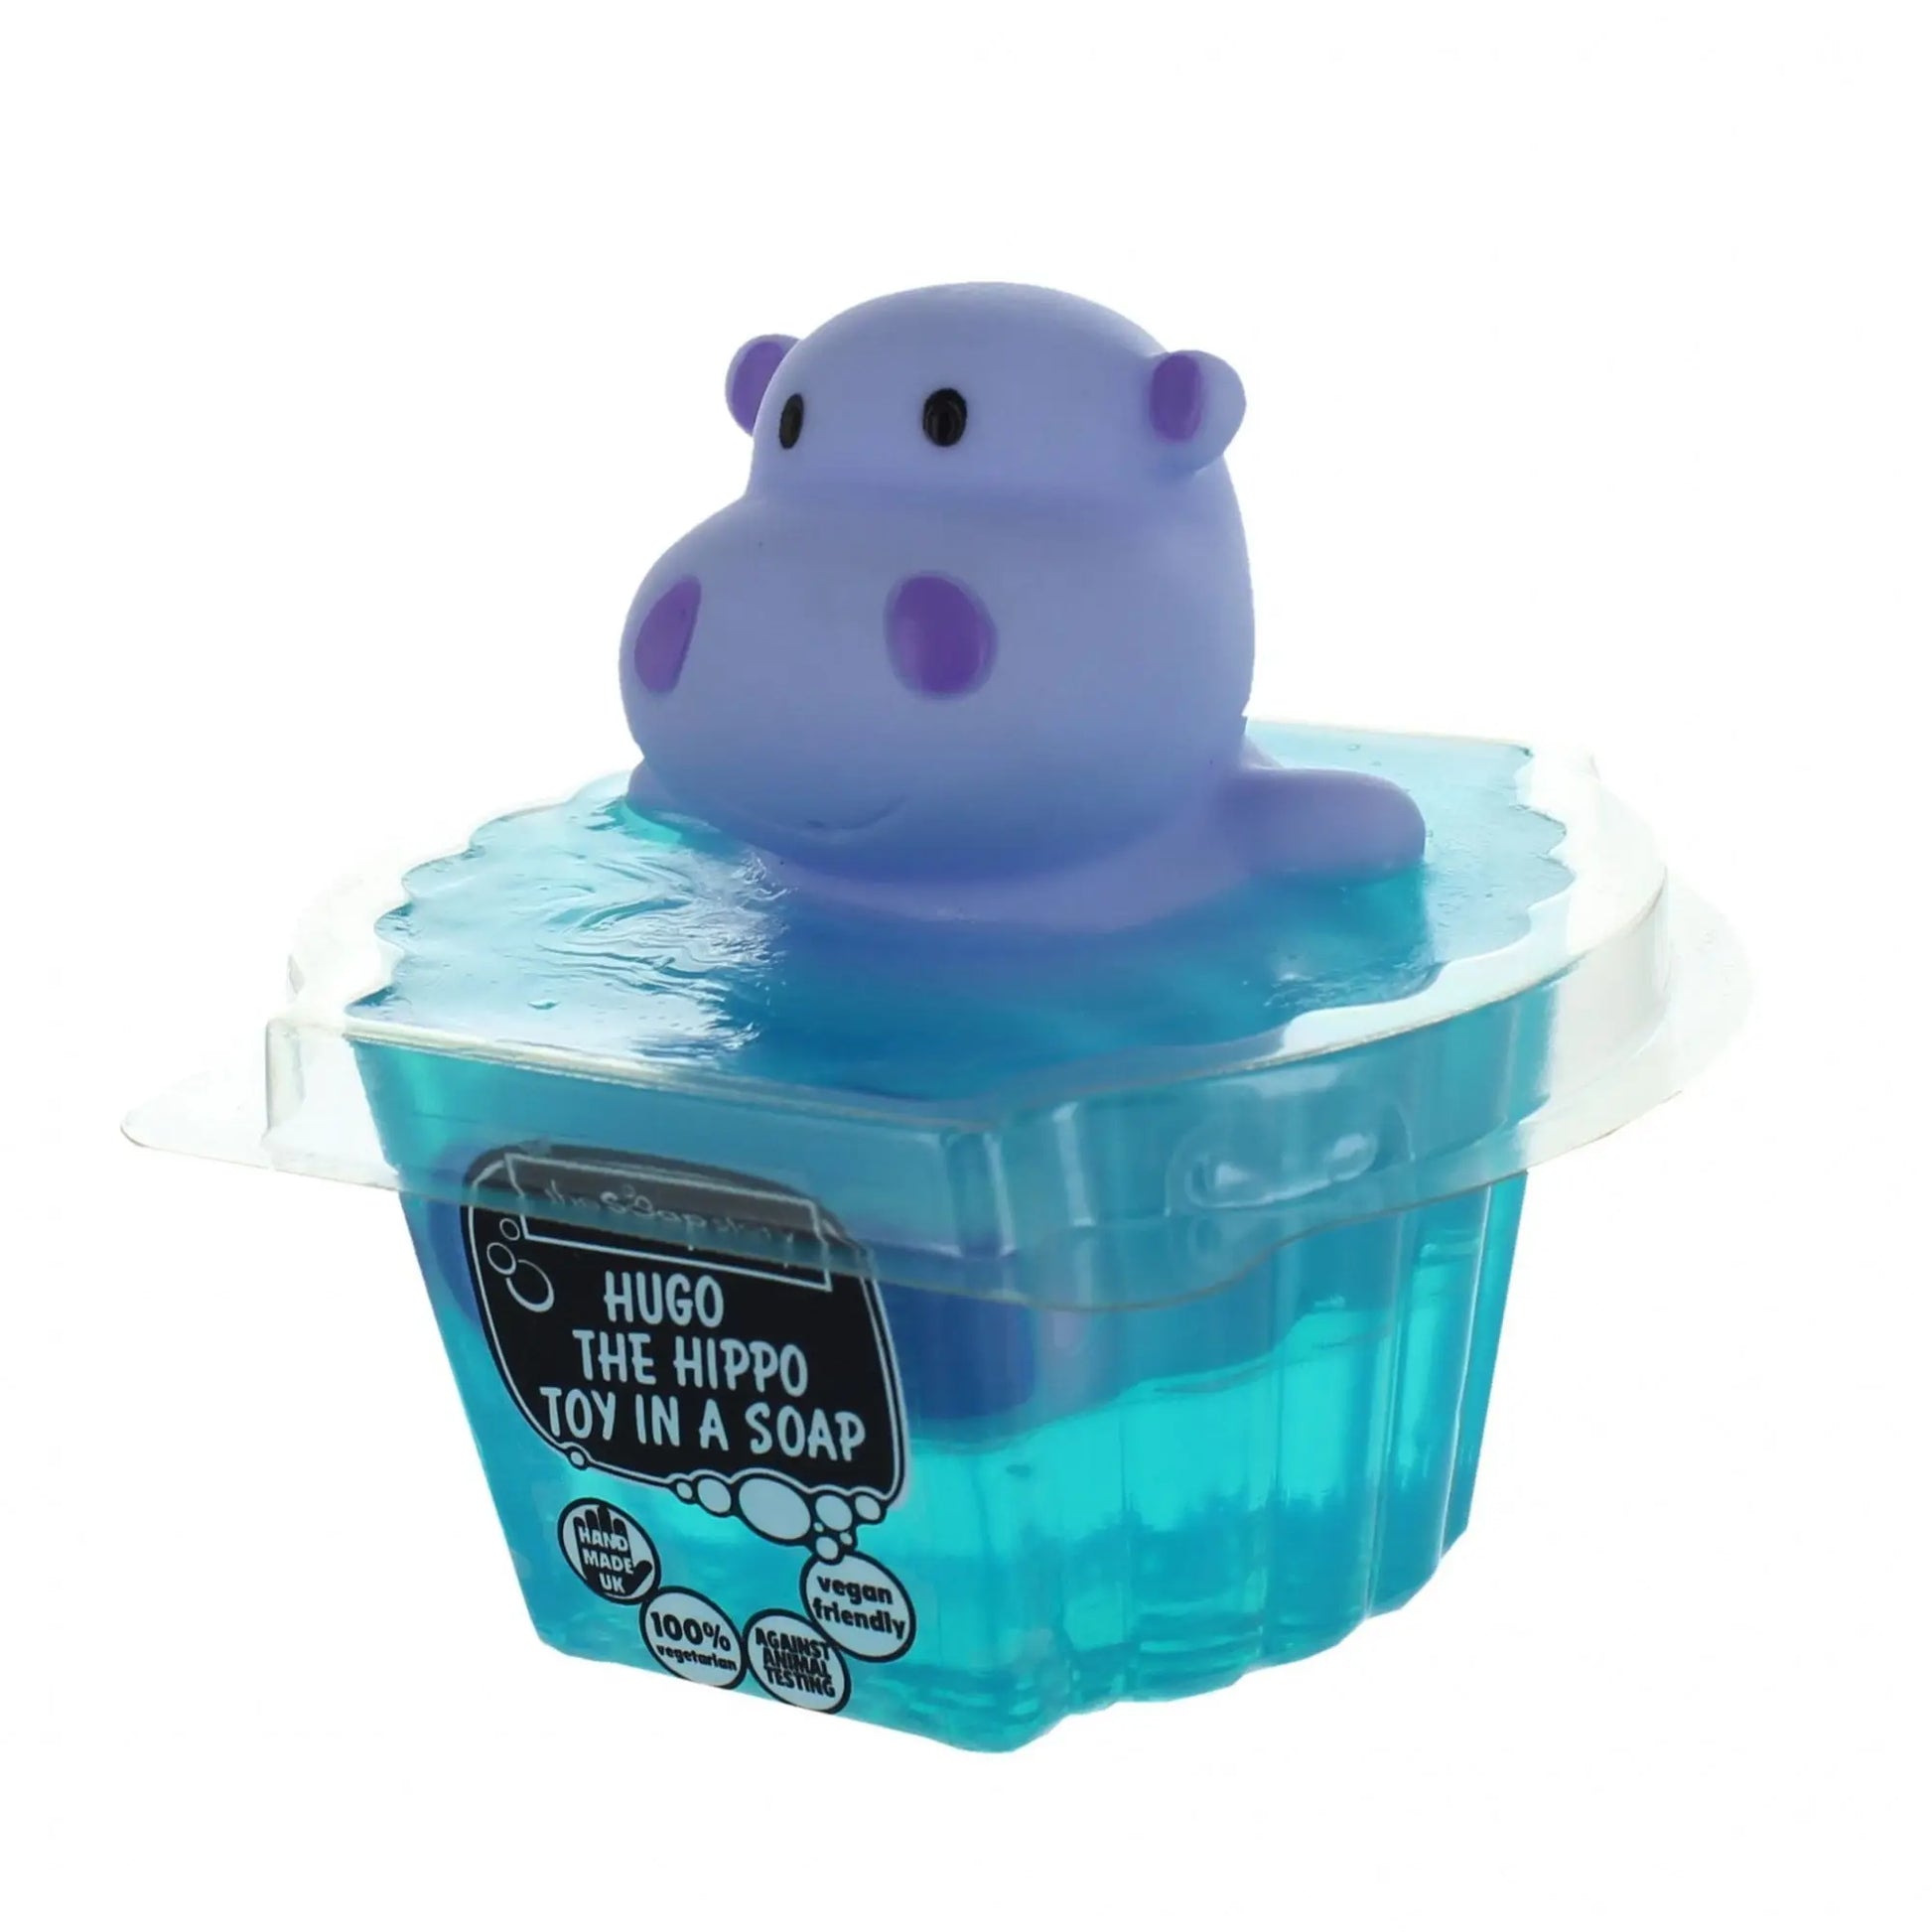 Hugo the Hippo Toy in Soap - Spellbound